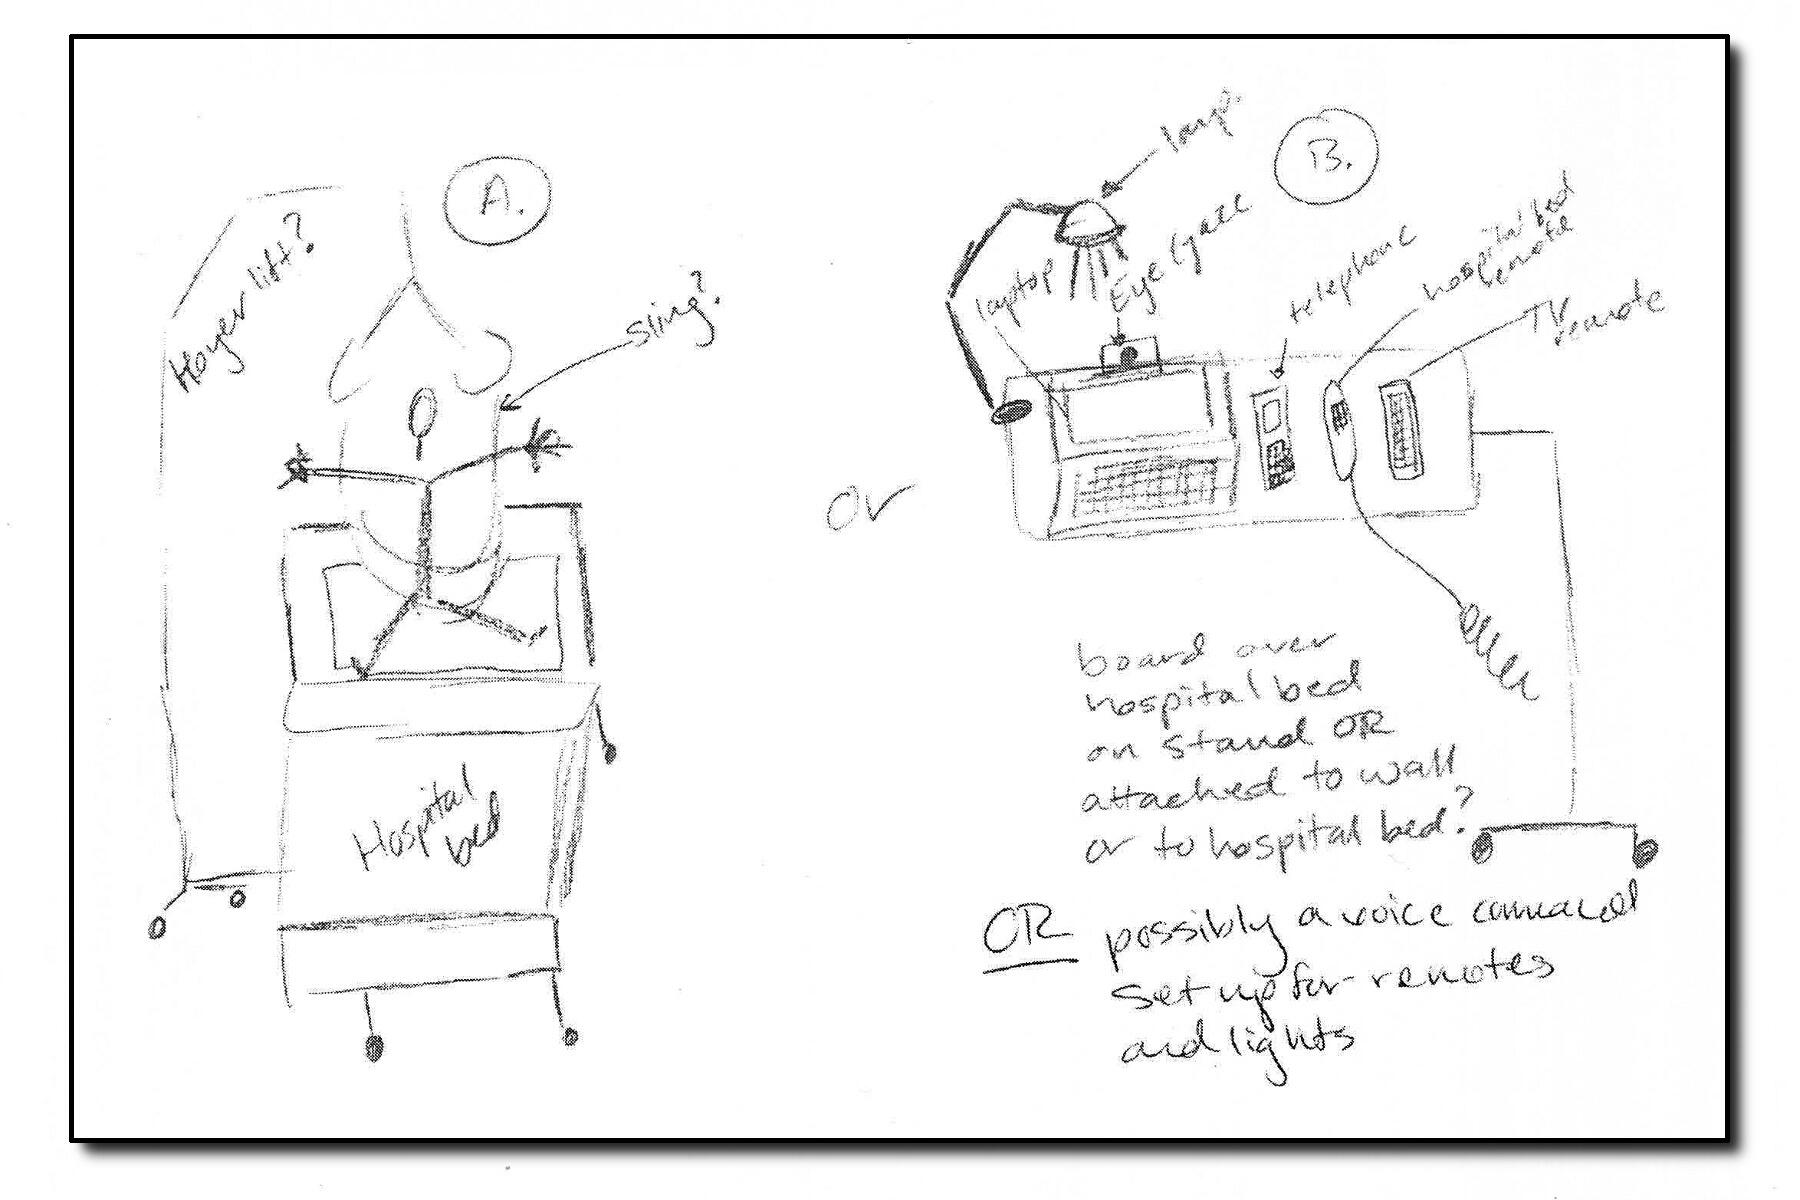 VCU Health clinical social worker Megan Stucke’s sketch was part of initial planning for a computer table to help Bayard safely access his computer.